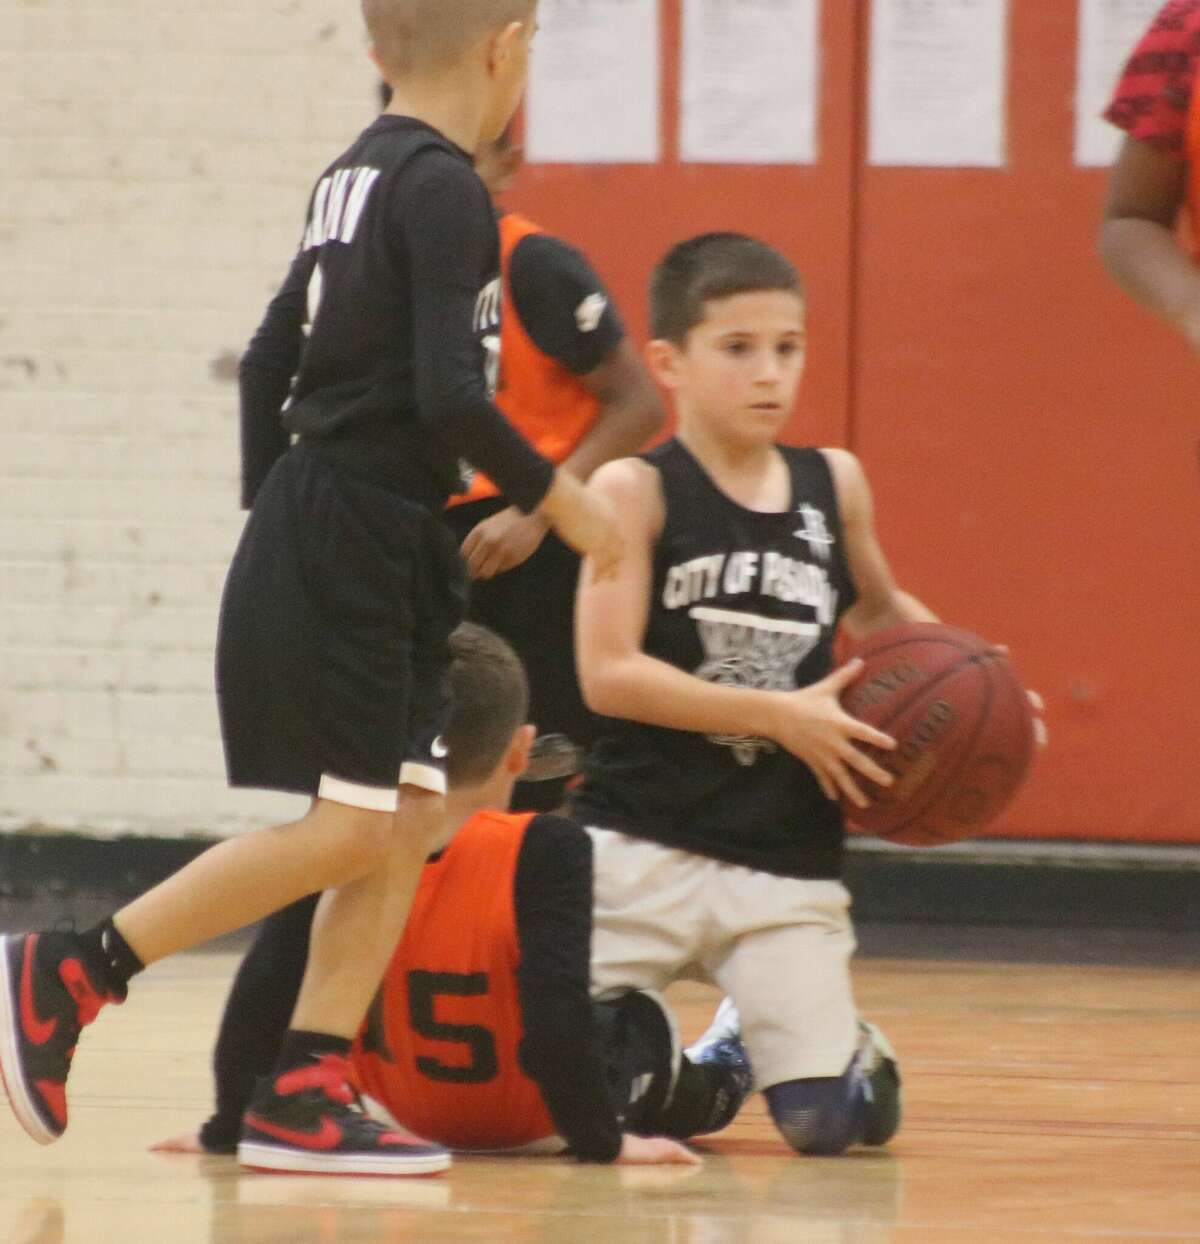   One of the Slattery boys comes up with a loose ball during a Pasadena youth basketball game last winter at PAL Gym.